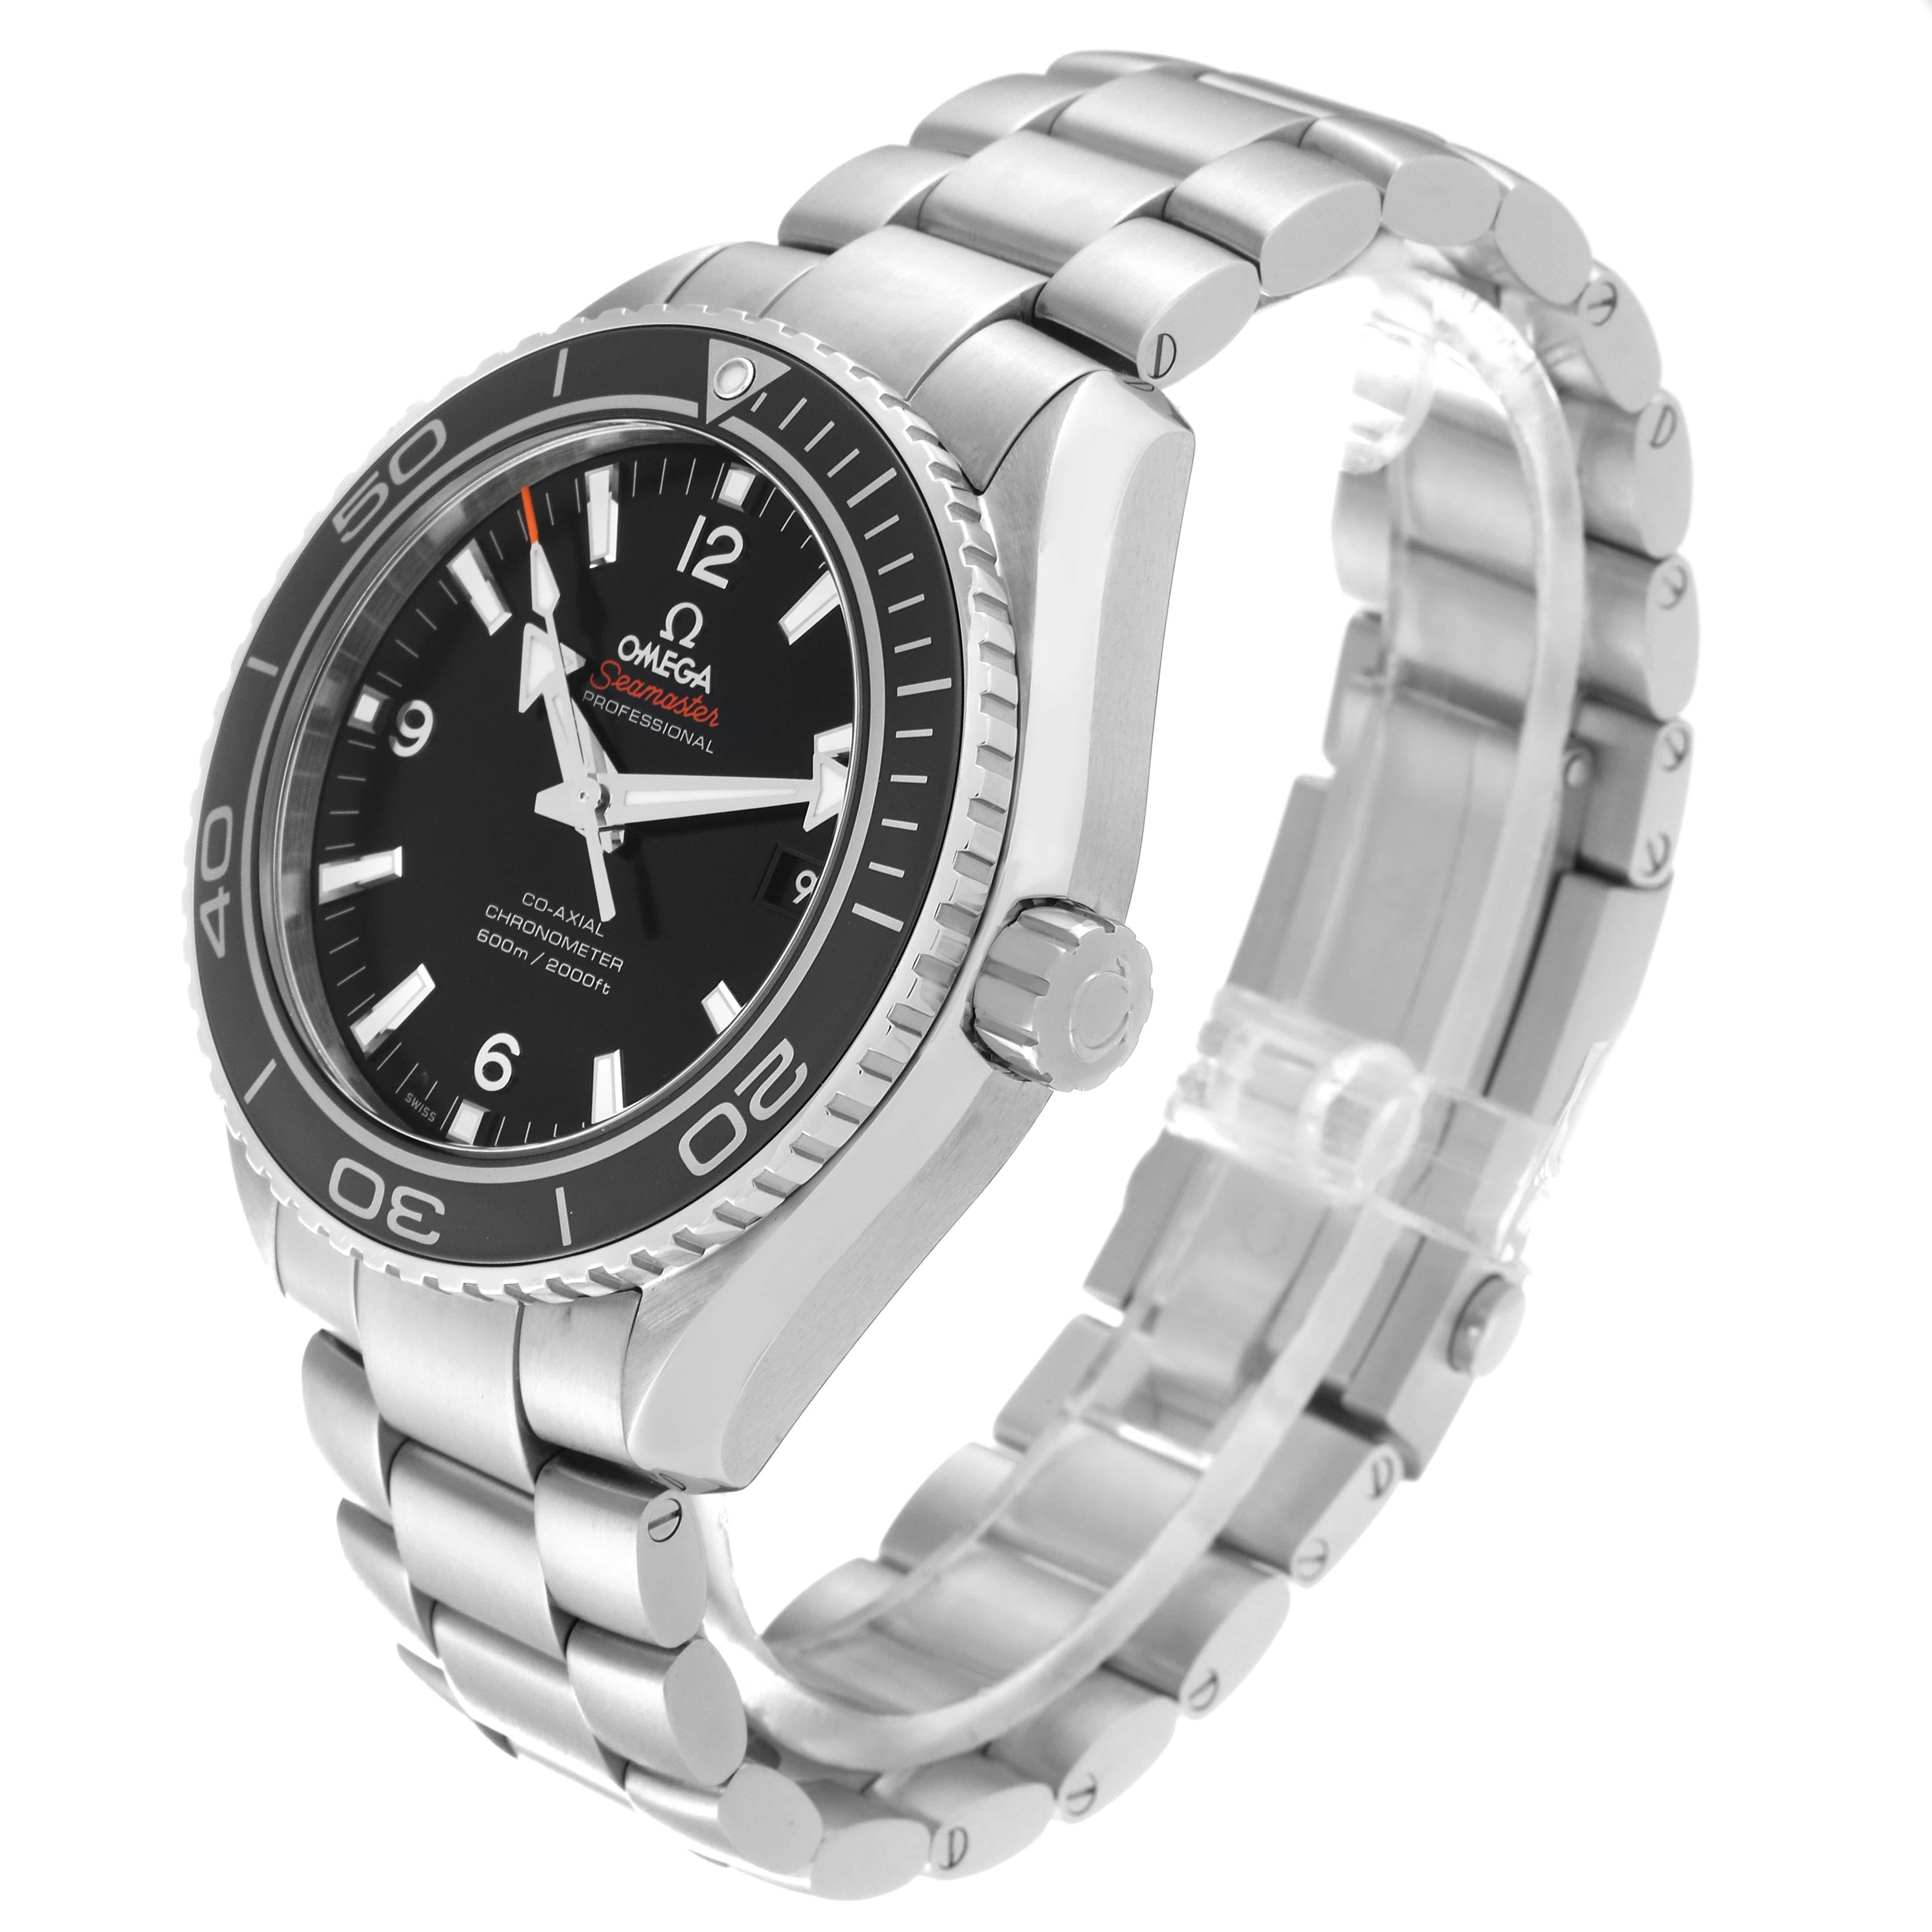 Omega Seamaster Planet Ocean 600M Steel Mens Watch 232.30.46.21.01.001 Card For Sale 5